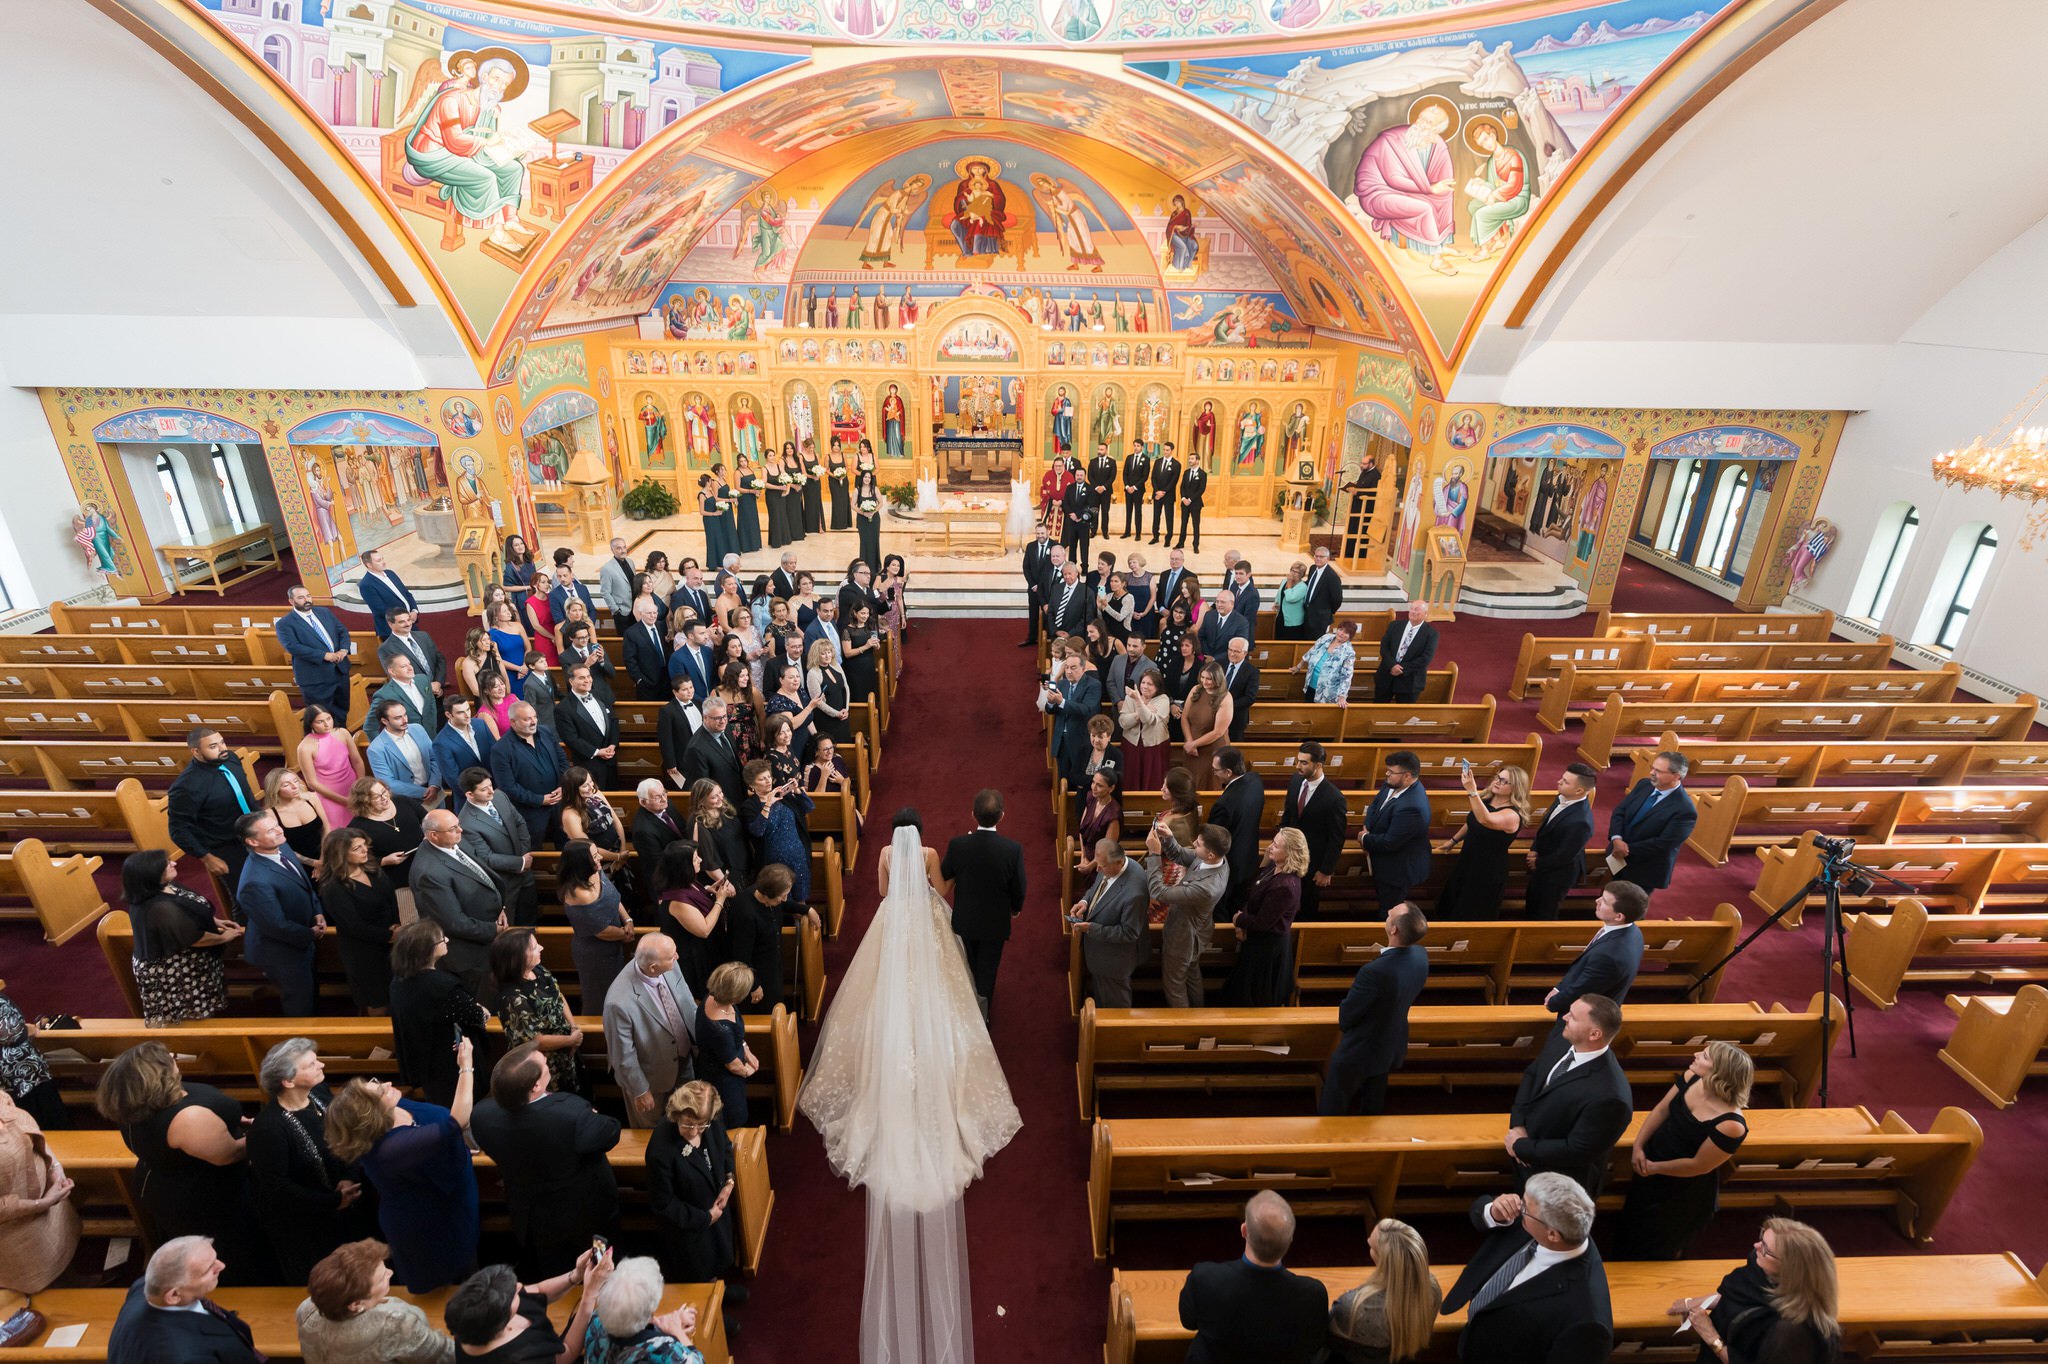 A bride walks down the aisle with her dad at an Assumption Greek Orthodox wedding in St. Clair Shores, Michigan.